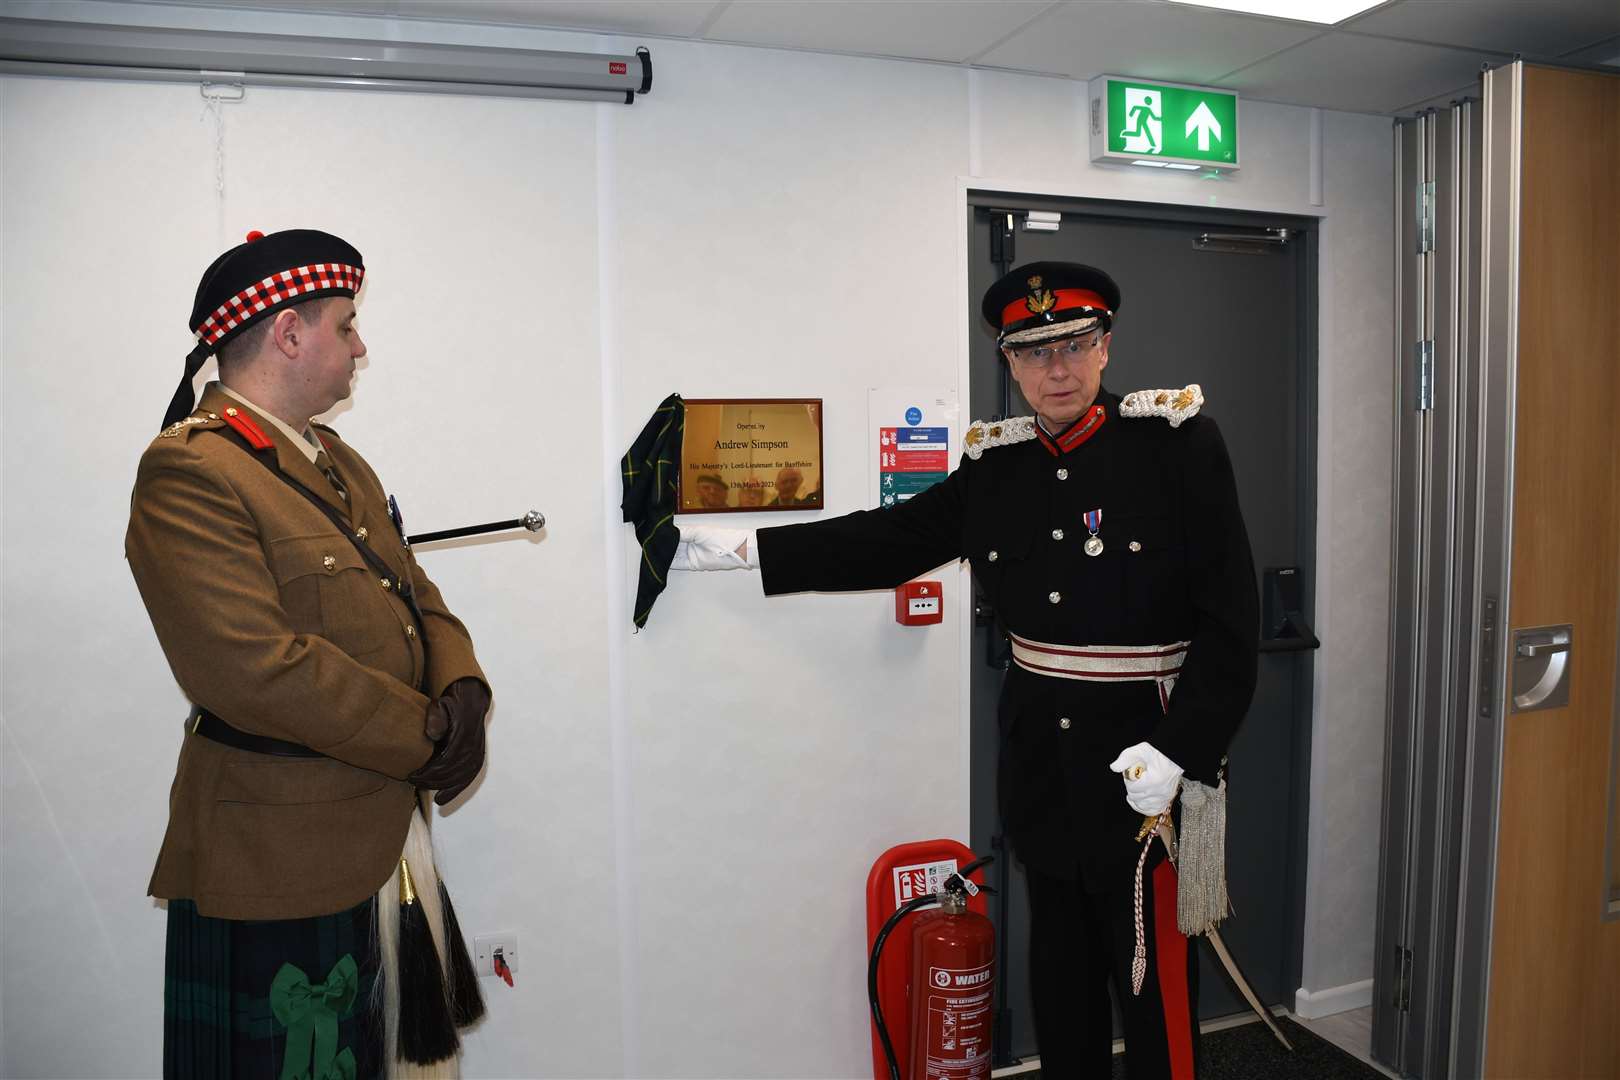 Lord Lieutenant of Banffshire Andrew Simpson officially opens the new cadet building in Banff watched by Battalion Commandant Colonel Gordon Rae.